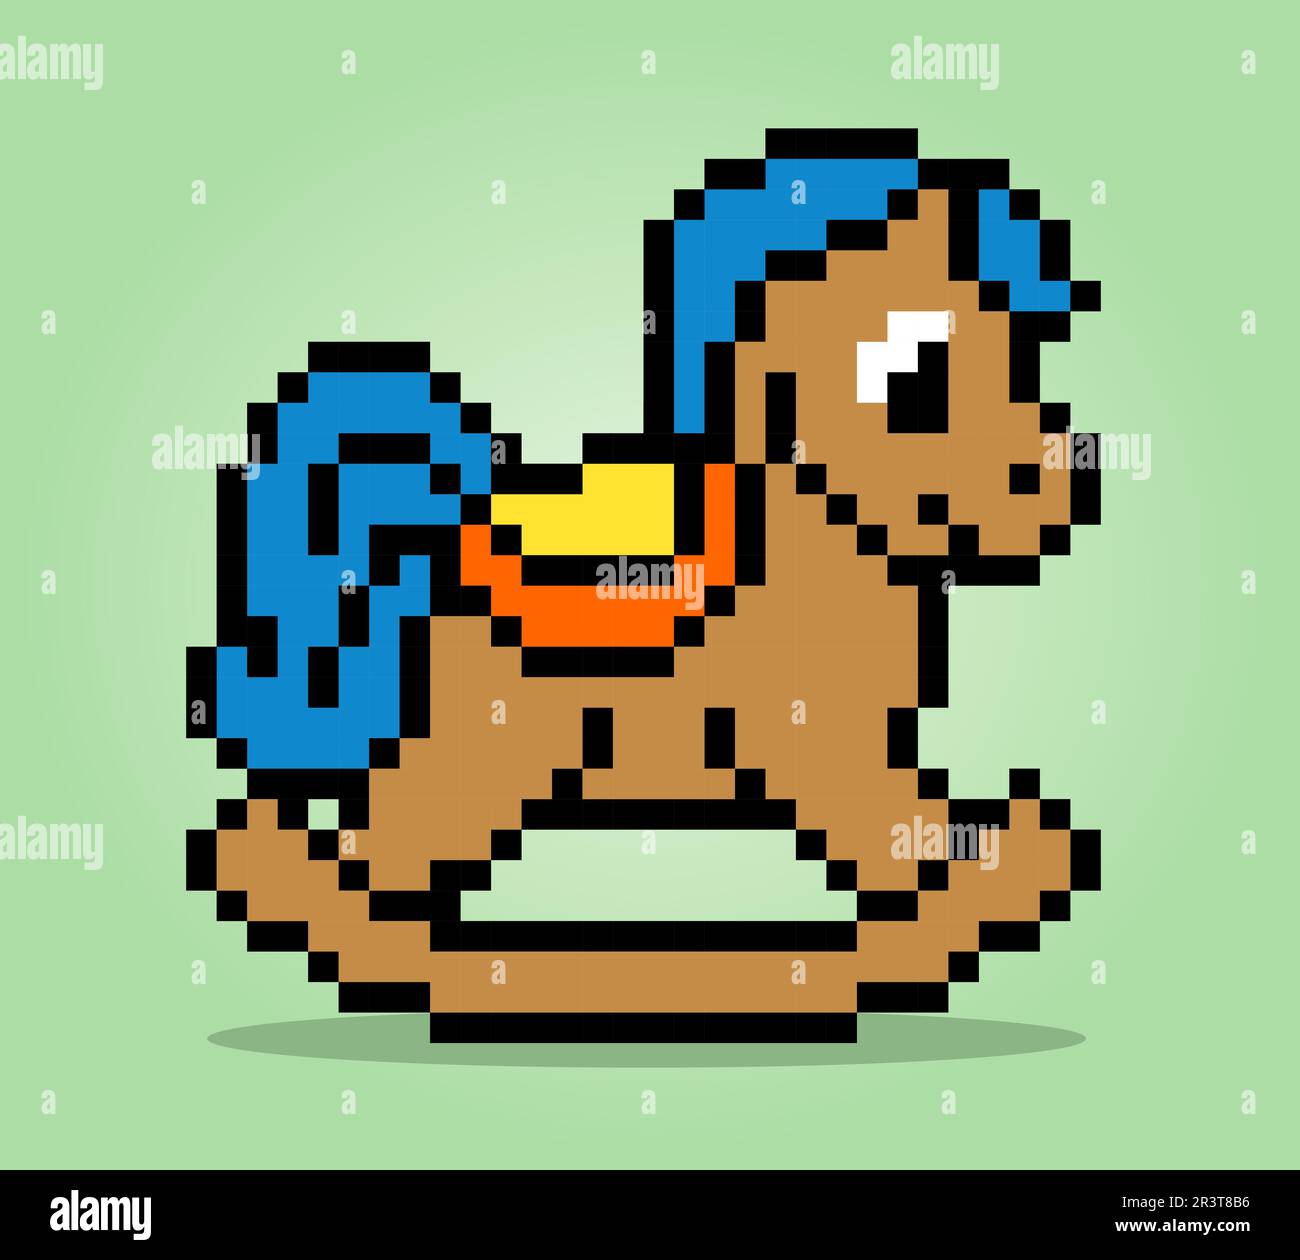 8 bit pixels of toy horse. Kids toy for game assets and cross stitch patterns in vector illustrations. Stock Vector